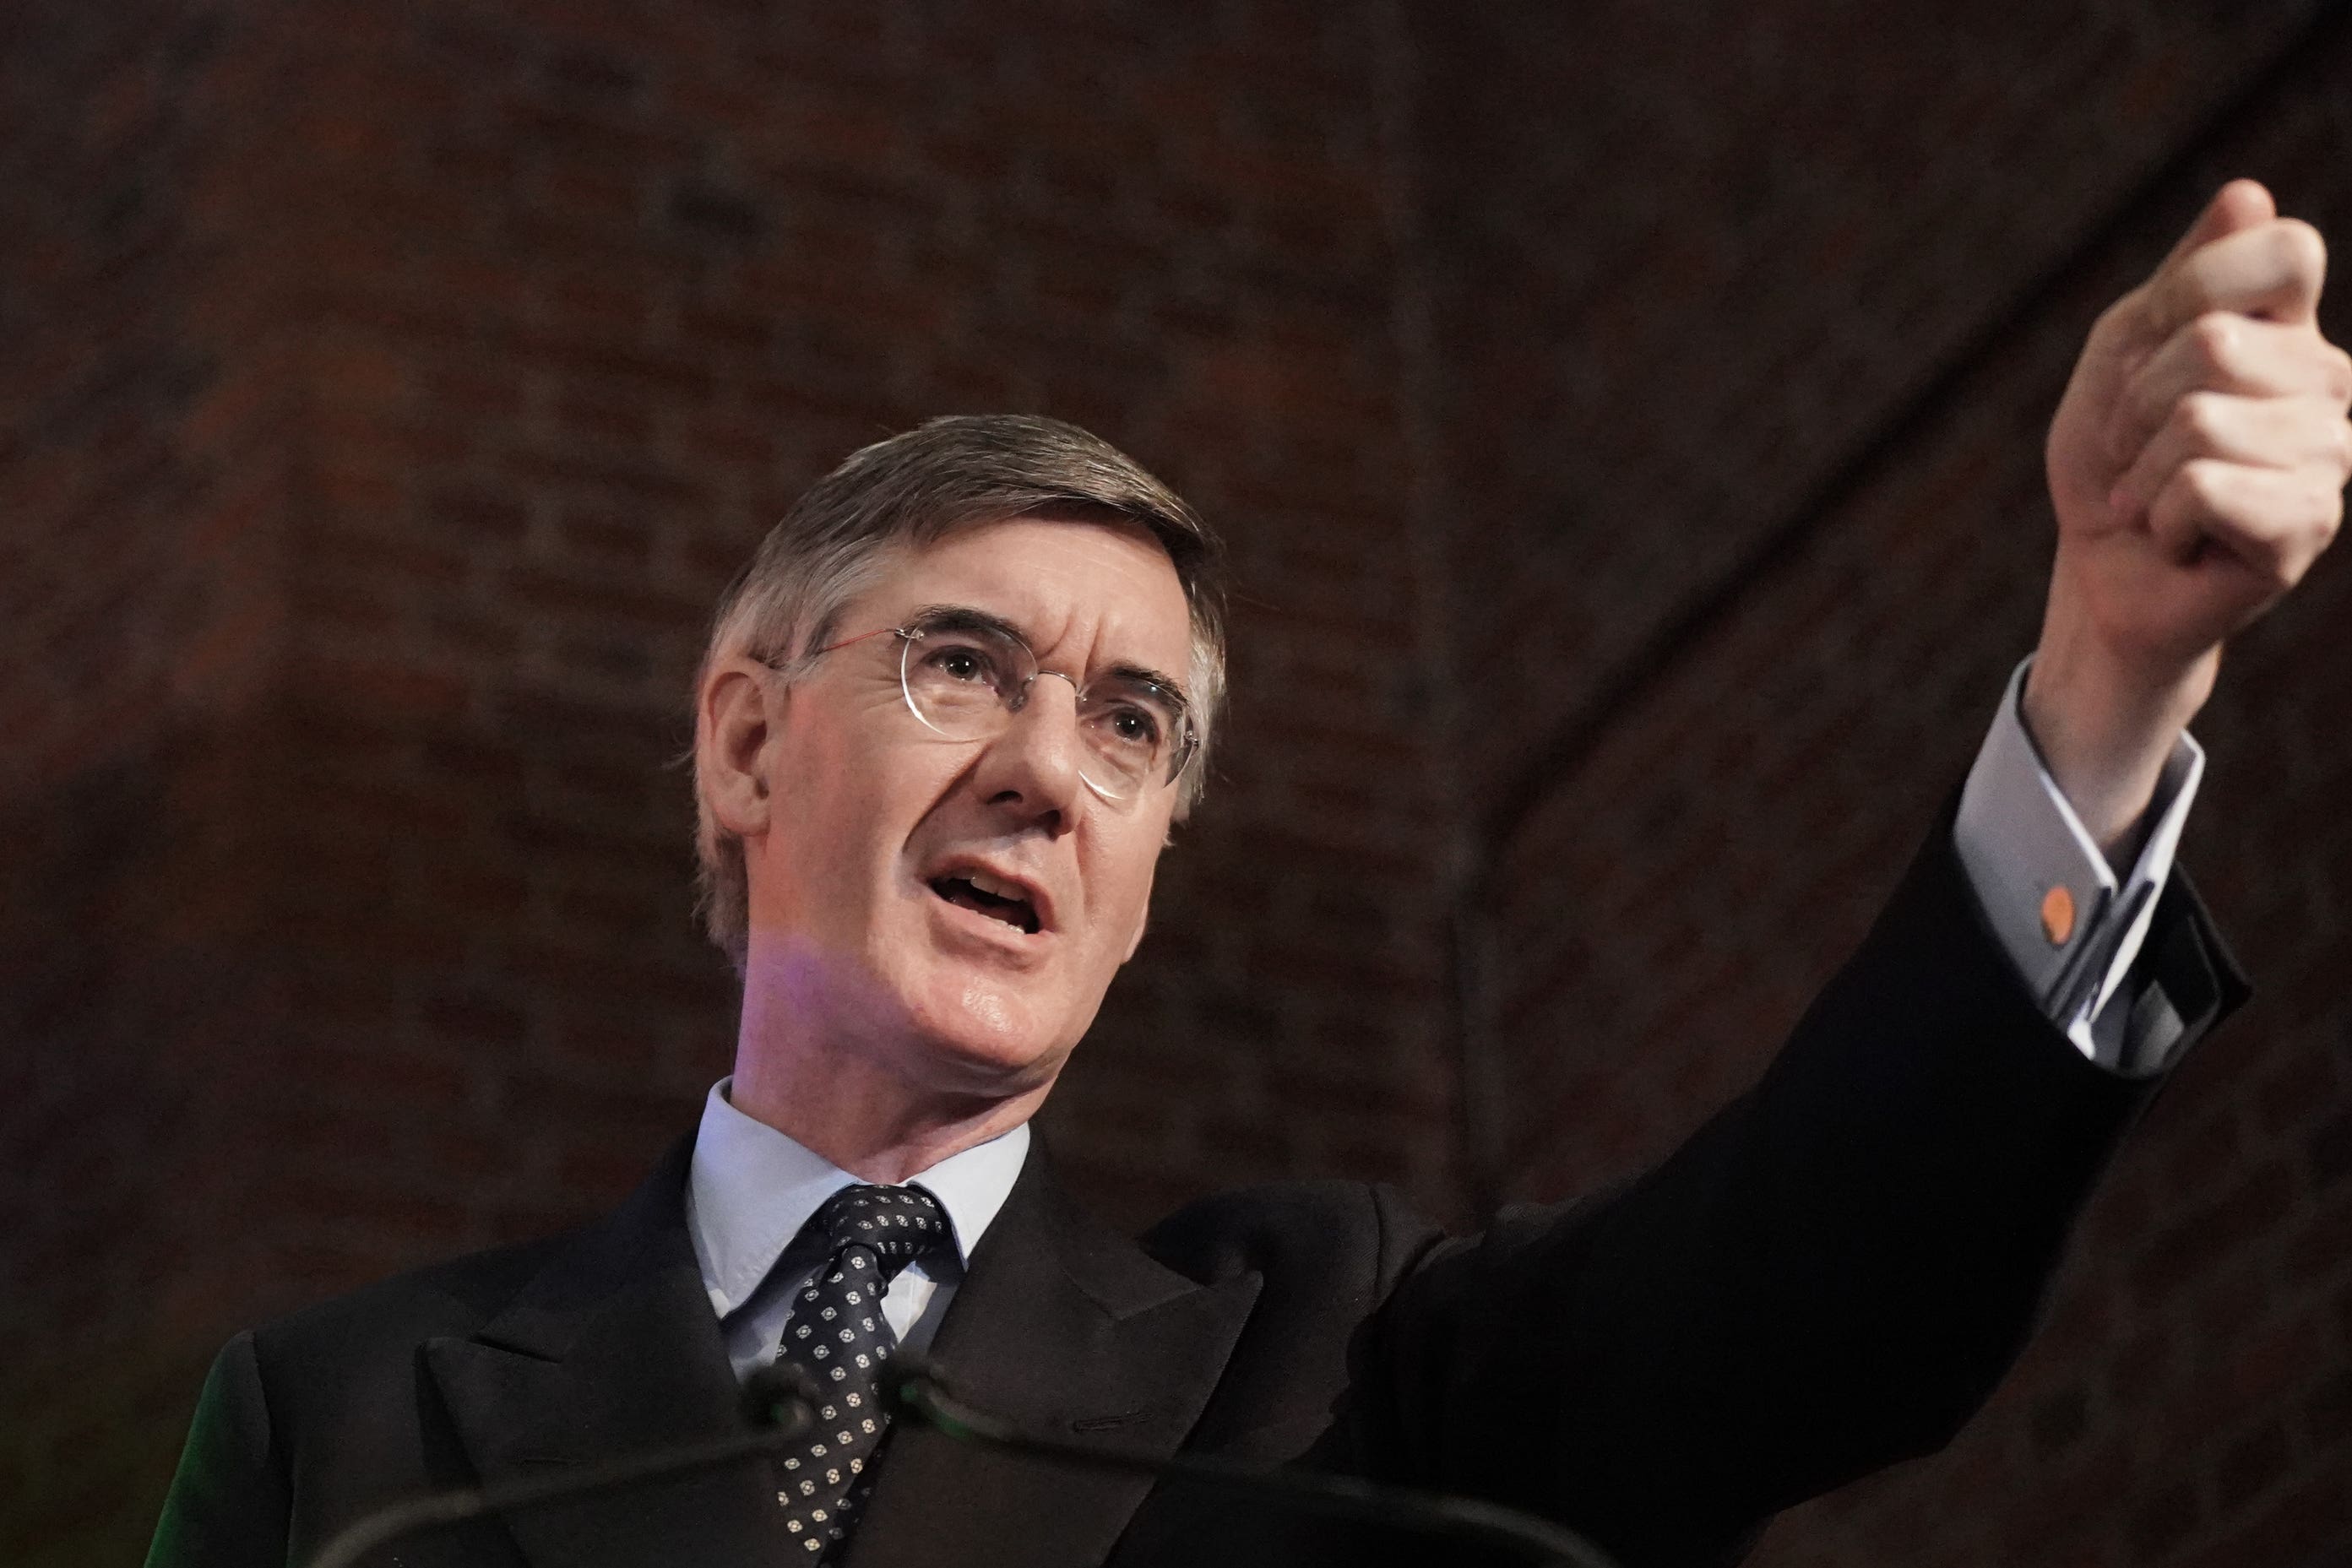 Sir Jacob Rees-Mogg urged the party to embrace more conservative principles